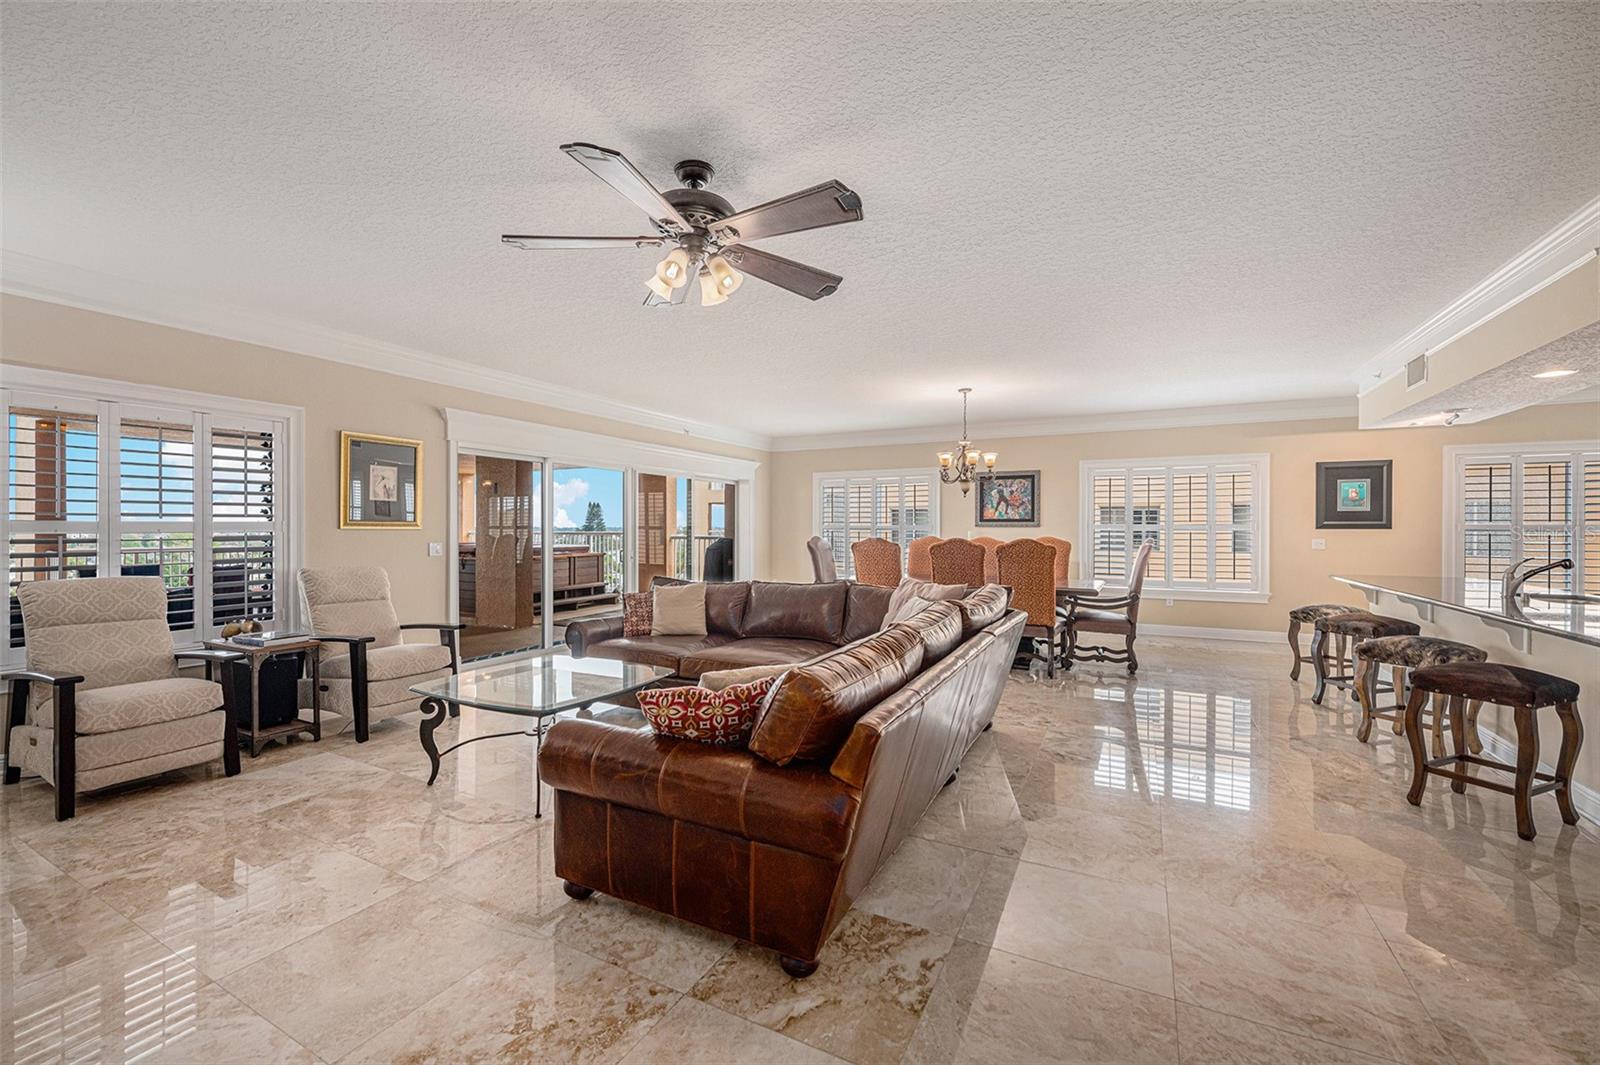 Combination great room is surrounded by an abundance of windows, sliding doors, and the beauty of Florida's sunshine!  Plantation Shutters on windows throughout the home.